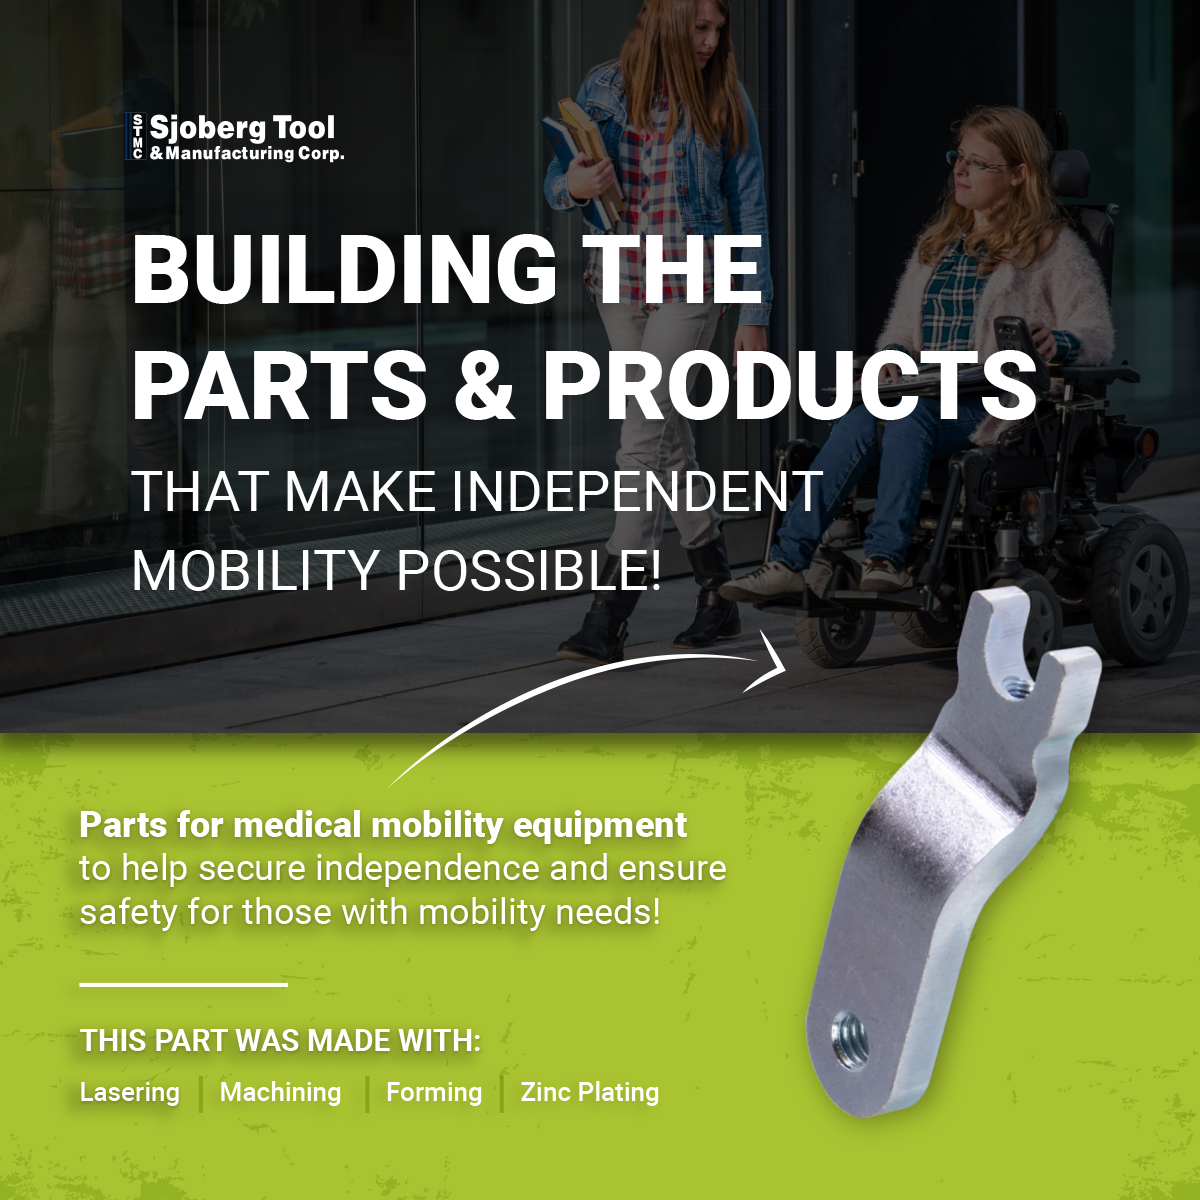 Building the Parts & Products That Make Independent Mobility Possible